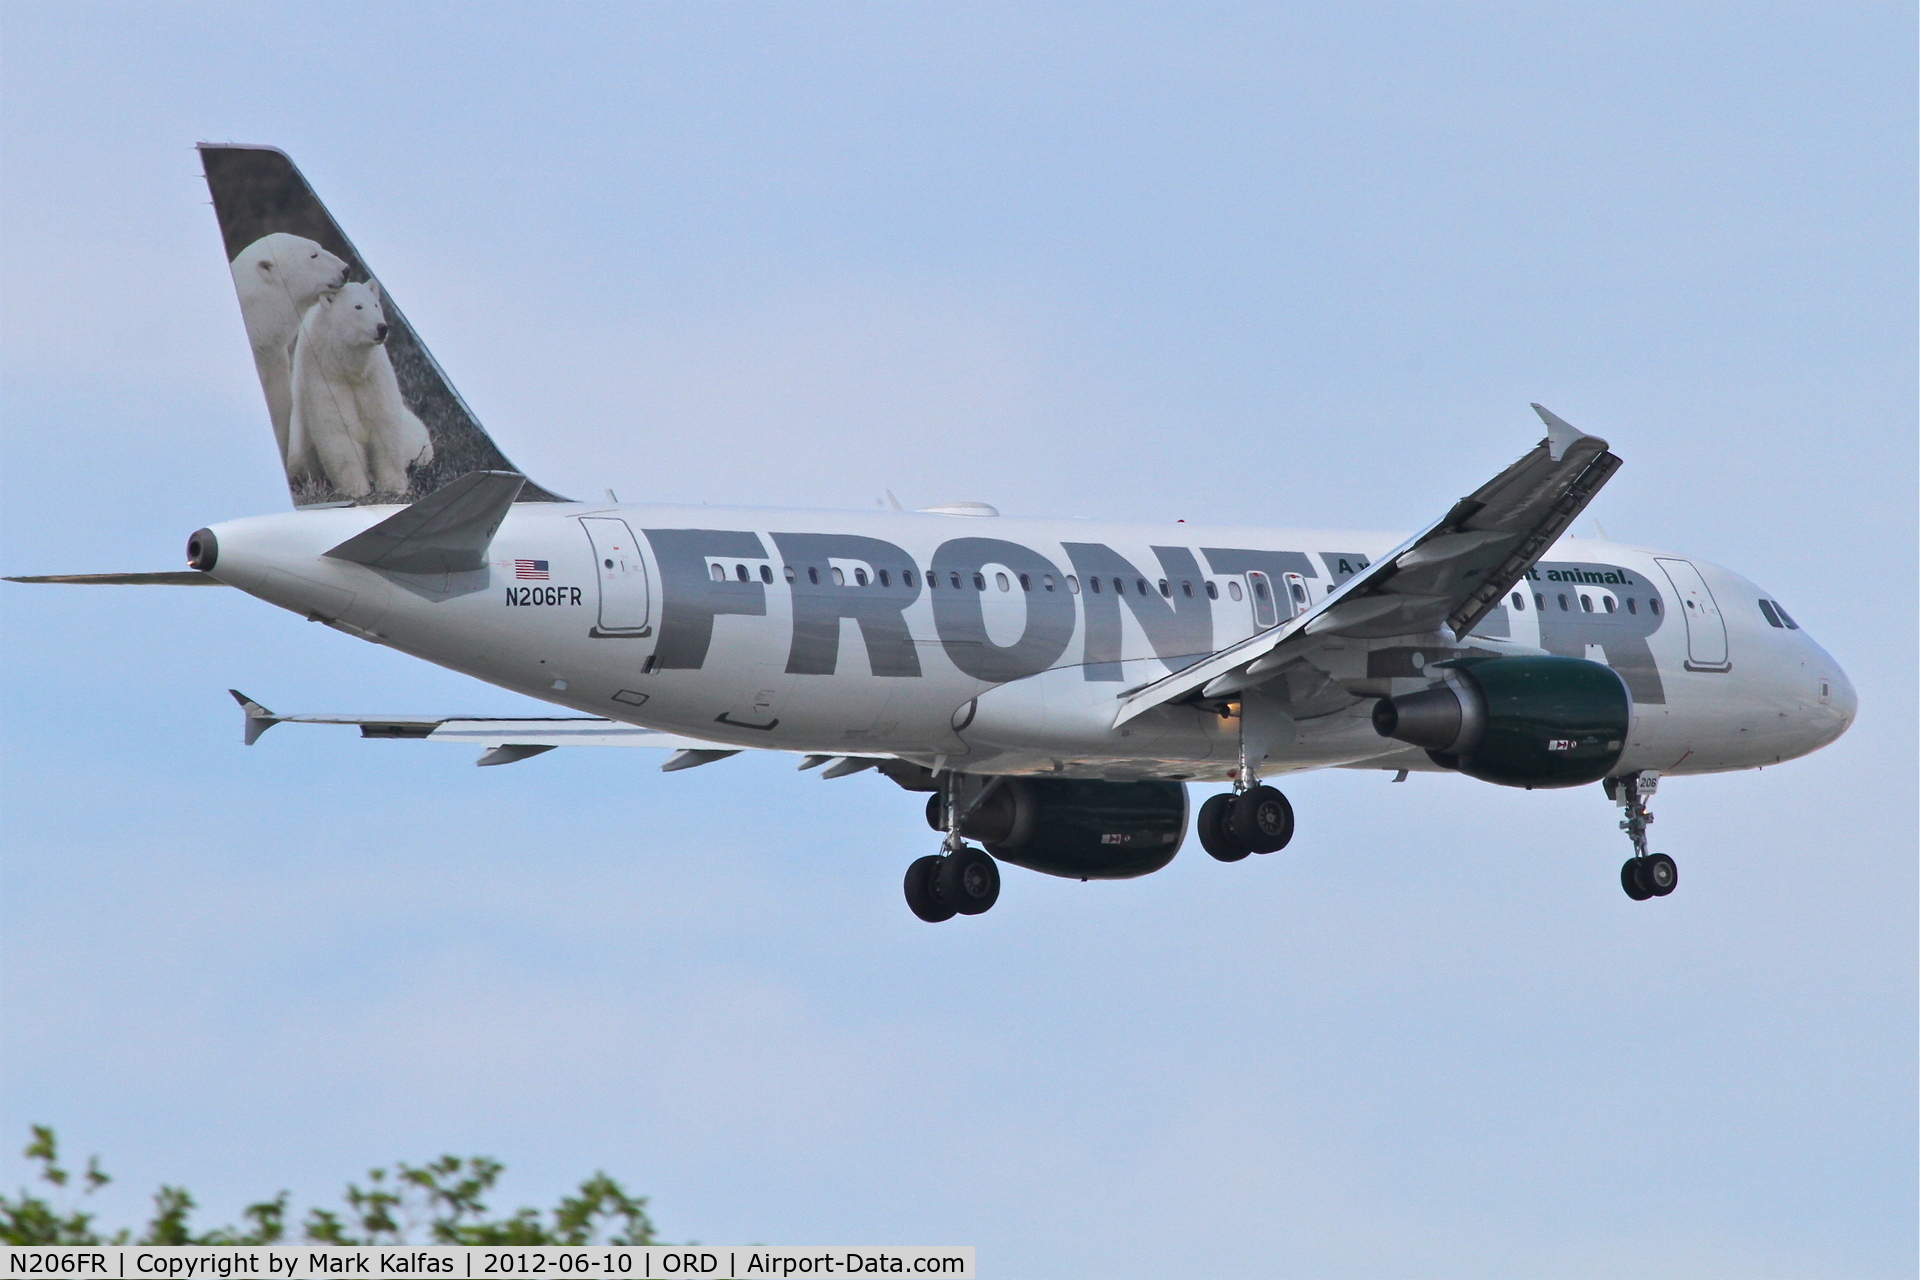 N206FR, 2010 Airbus A320-214 C/N 4272, Frontier Airlines Airbus A320-214, FFT8545 arriving from Cancun Int'l /MMUN, RWY 10 approach at O'Hare.